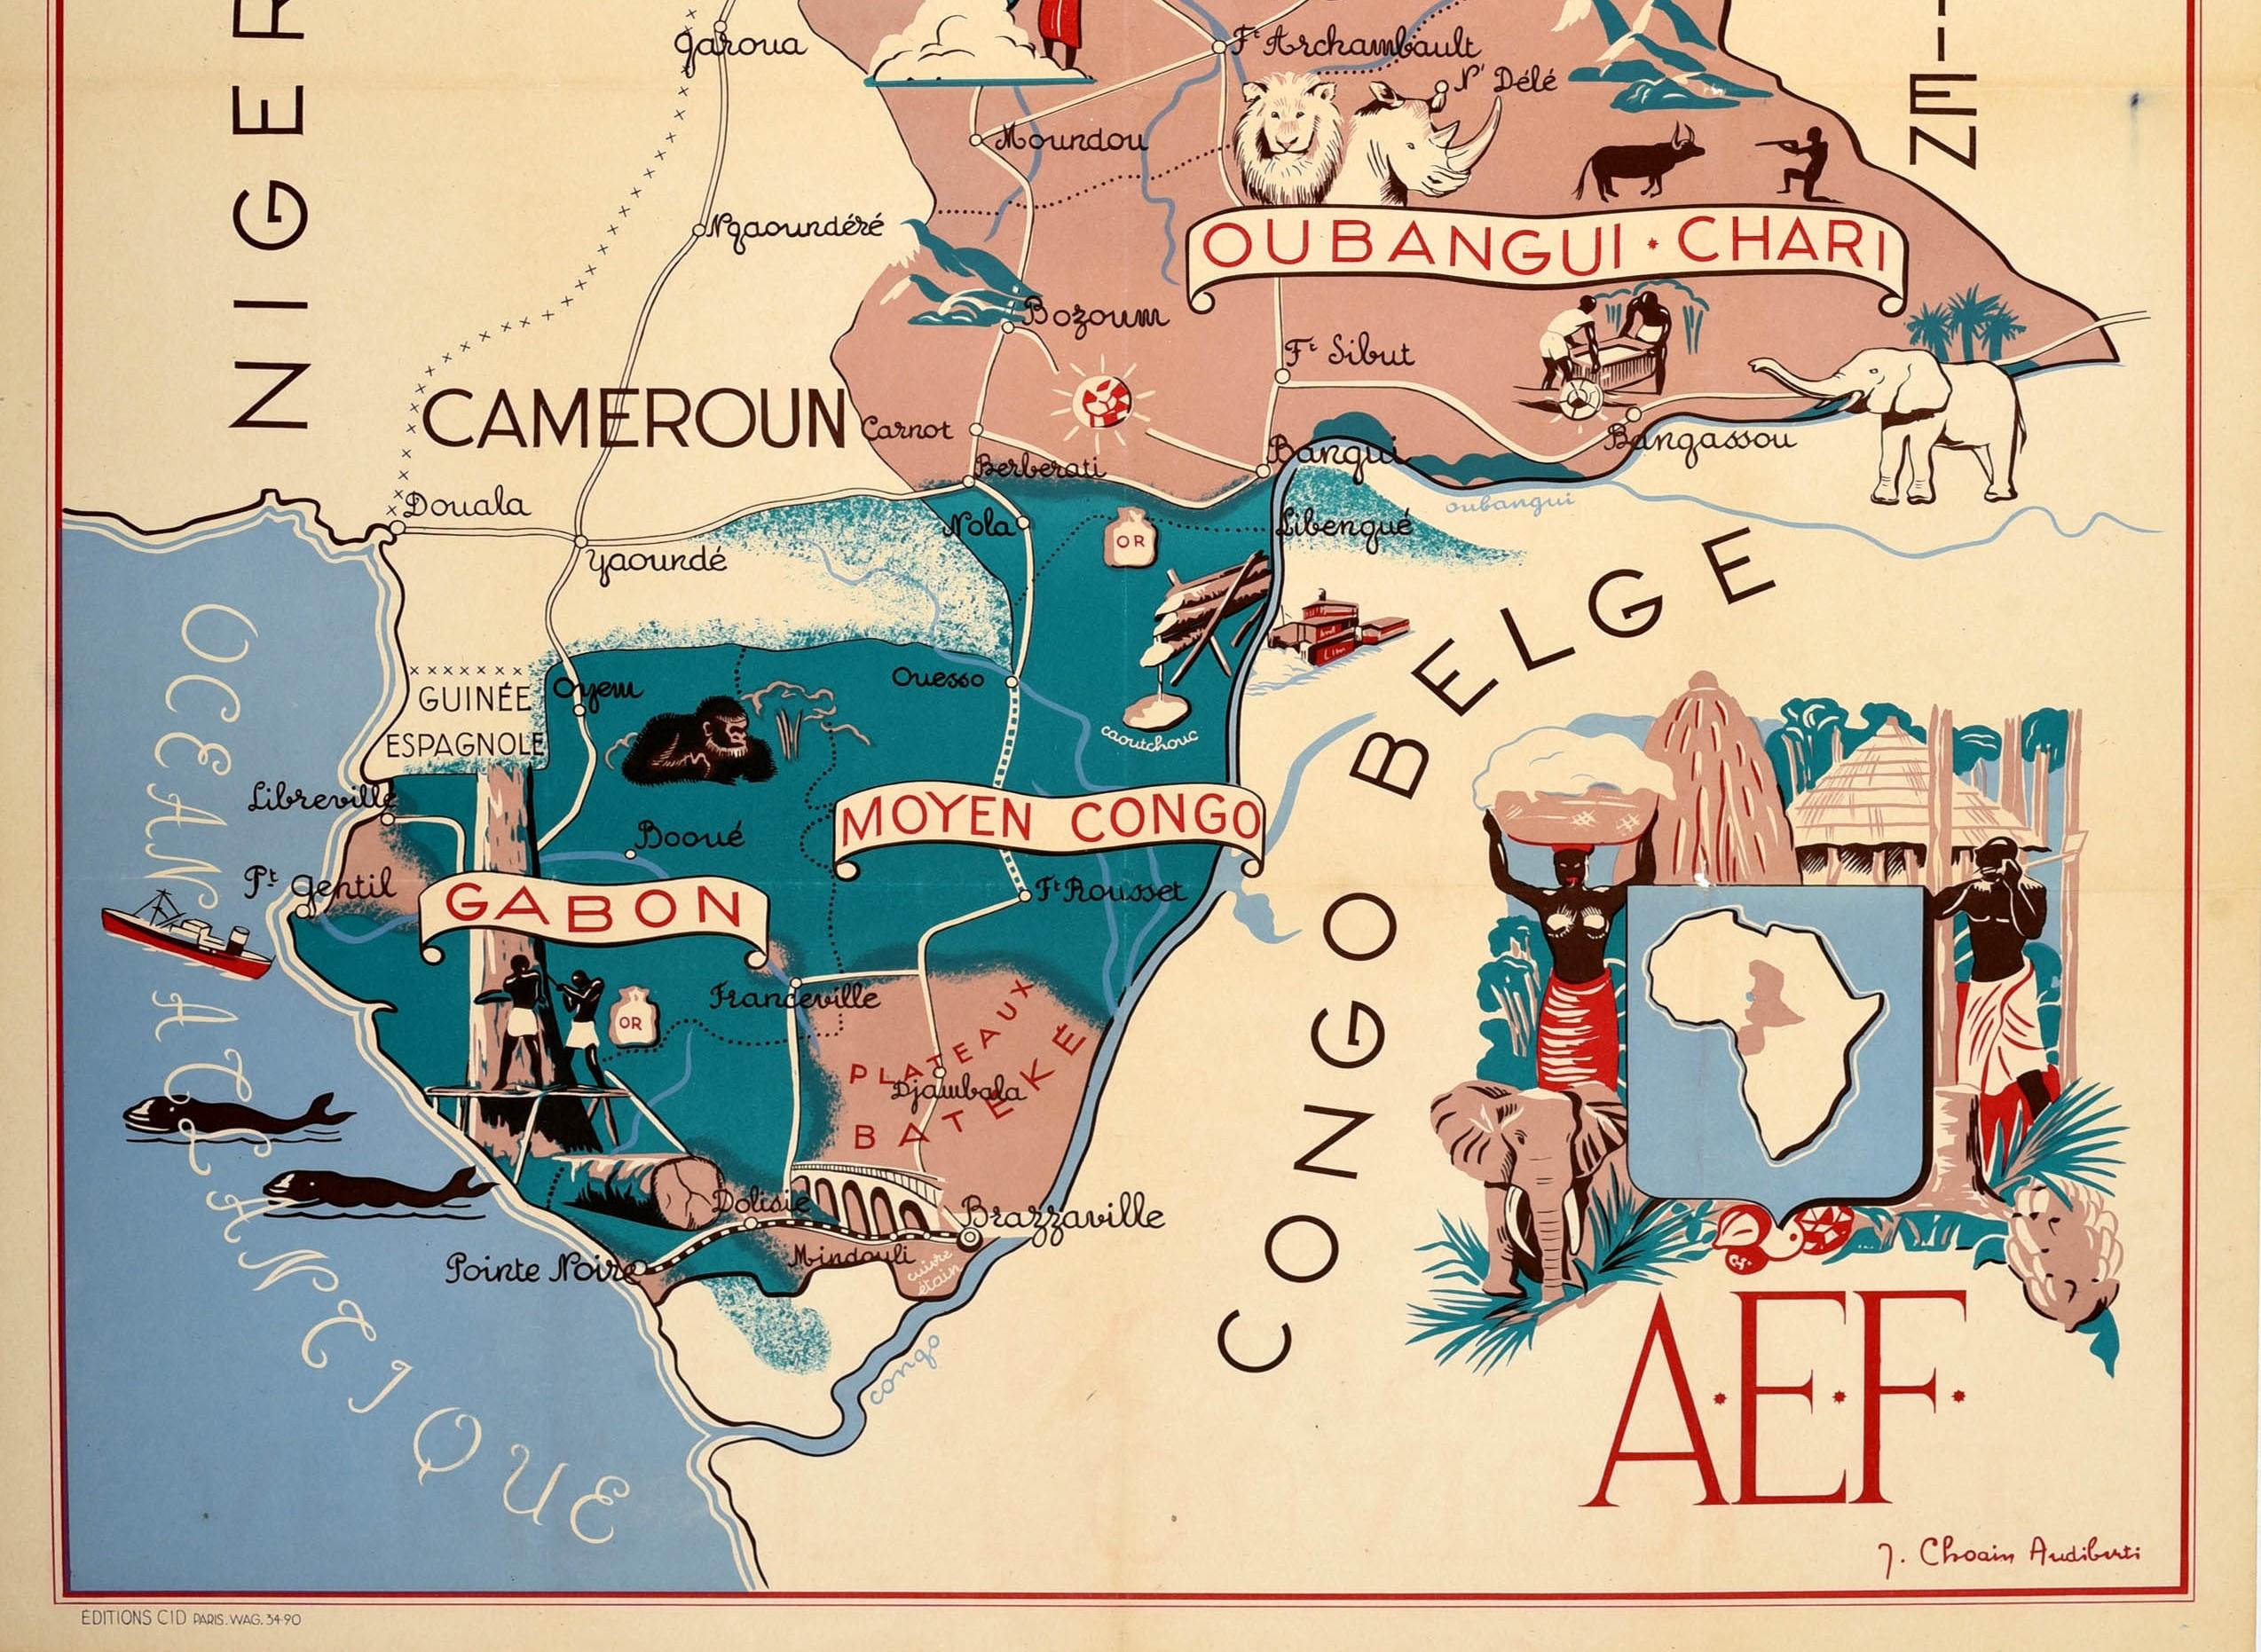 Original vintage pictorial map poster of French Equatorial Africa / Afrique Equatoriale Francaise featuring and illustrated design by J. Choain Audiberti marking and listing countries in the region including Nigeria, Niger, Libya, Chad, Cameroon,